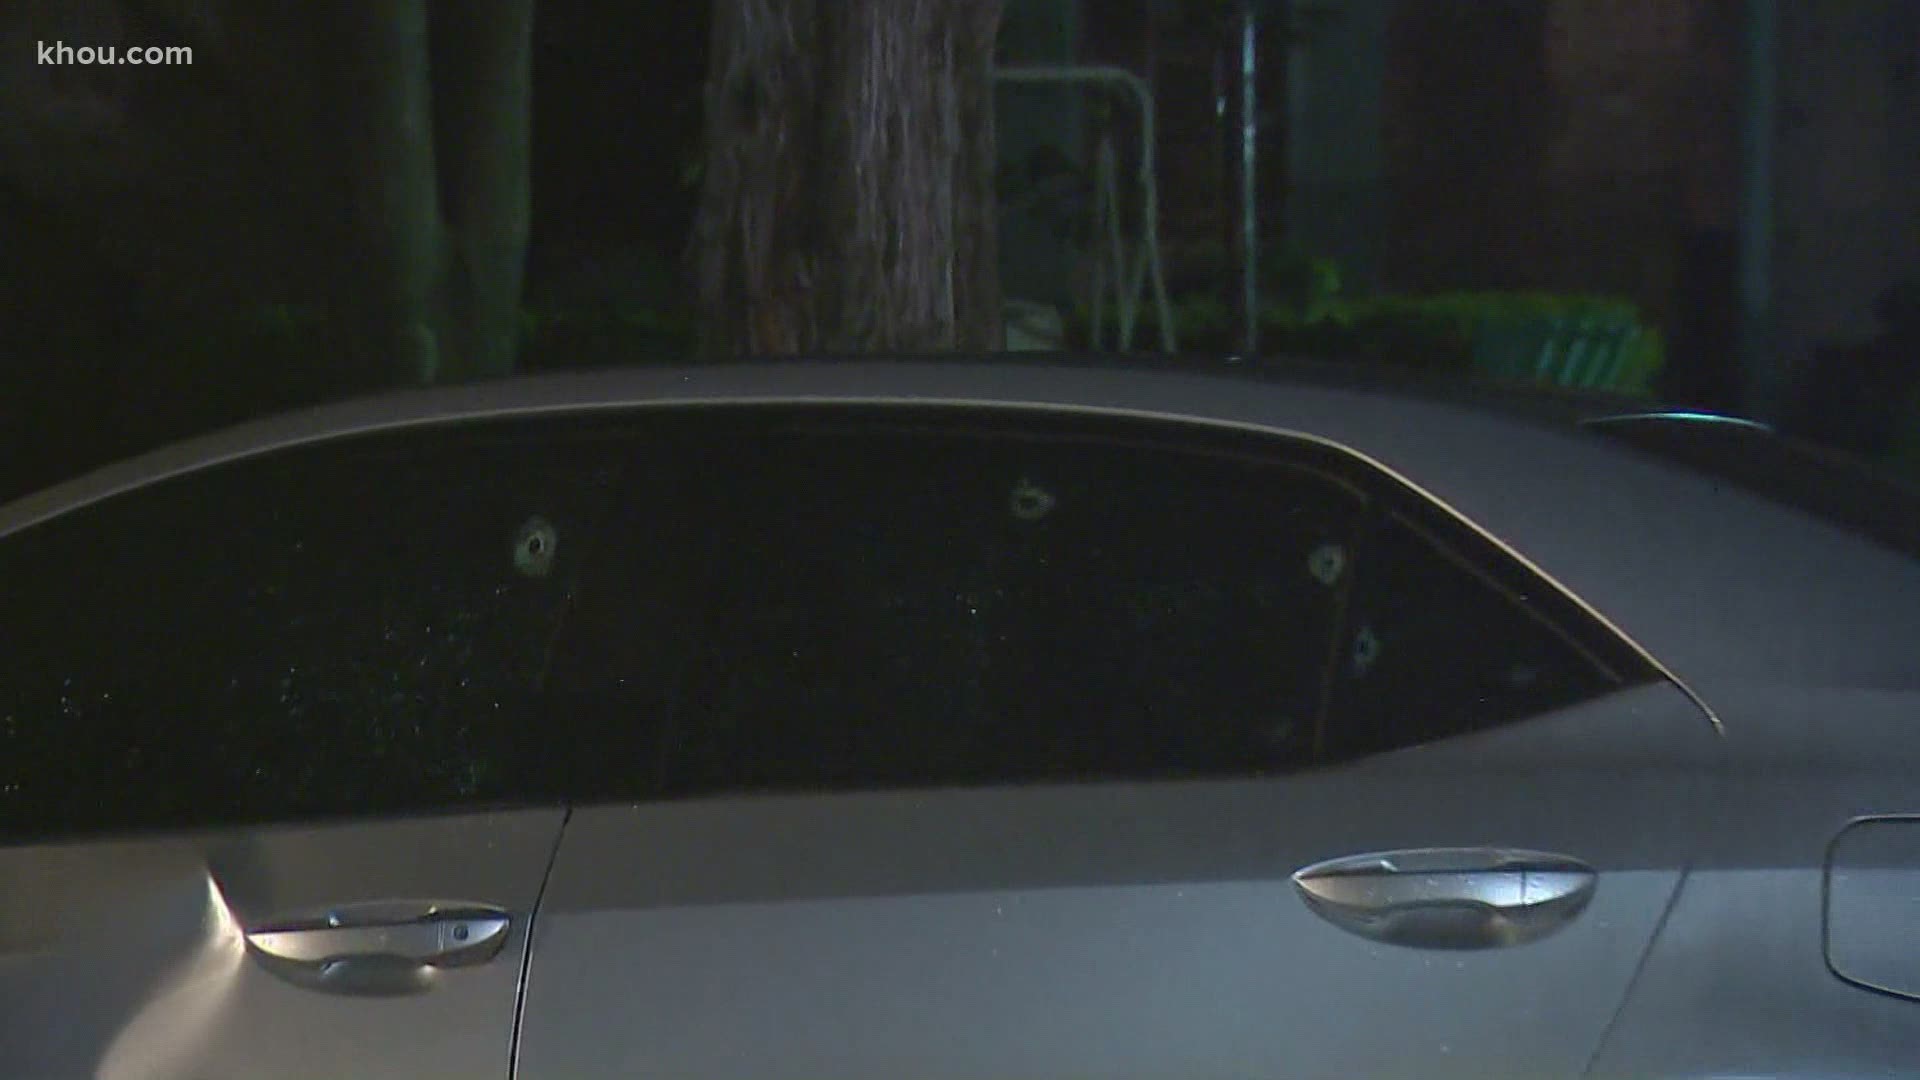 KHOU 11's Janel Forte reports a man in his 70s is lucky to be alive after someone fired several gunshots at a home and vehicle.